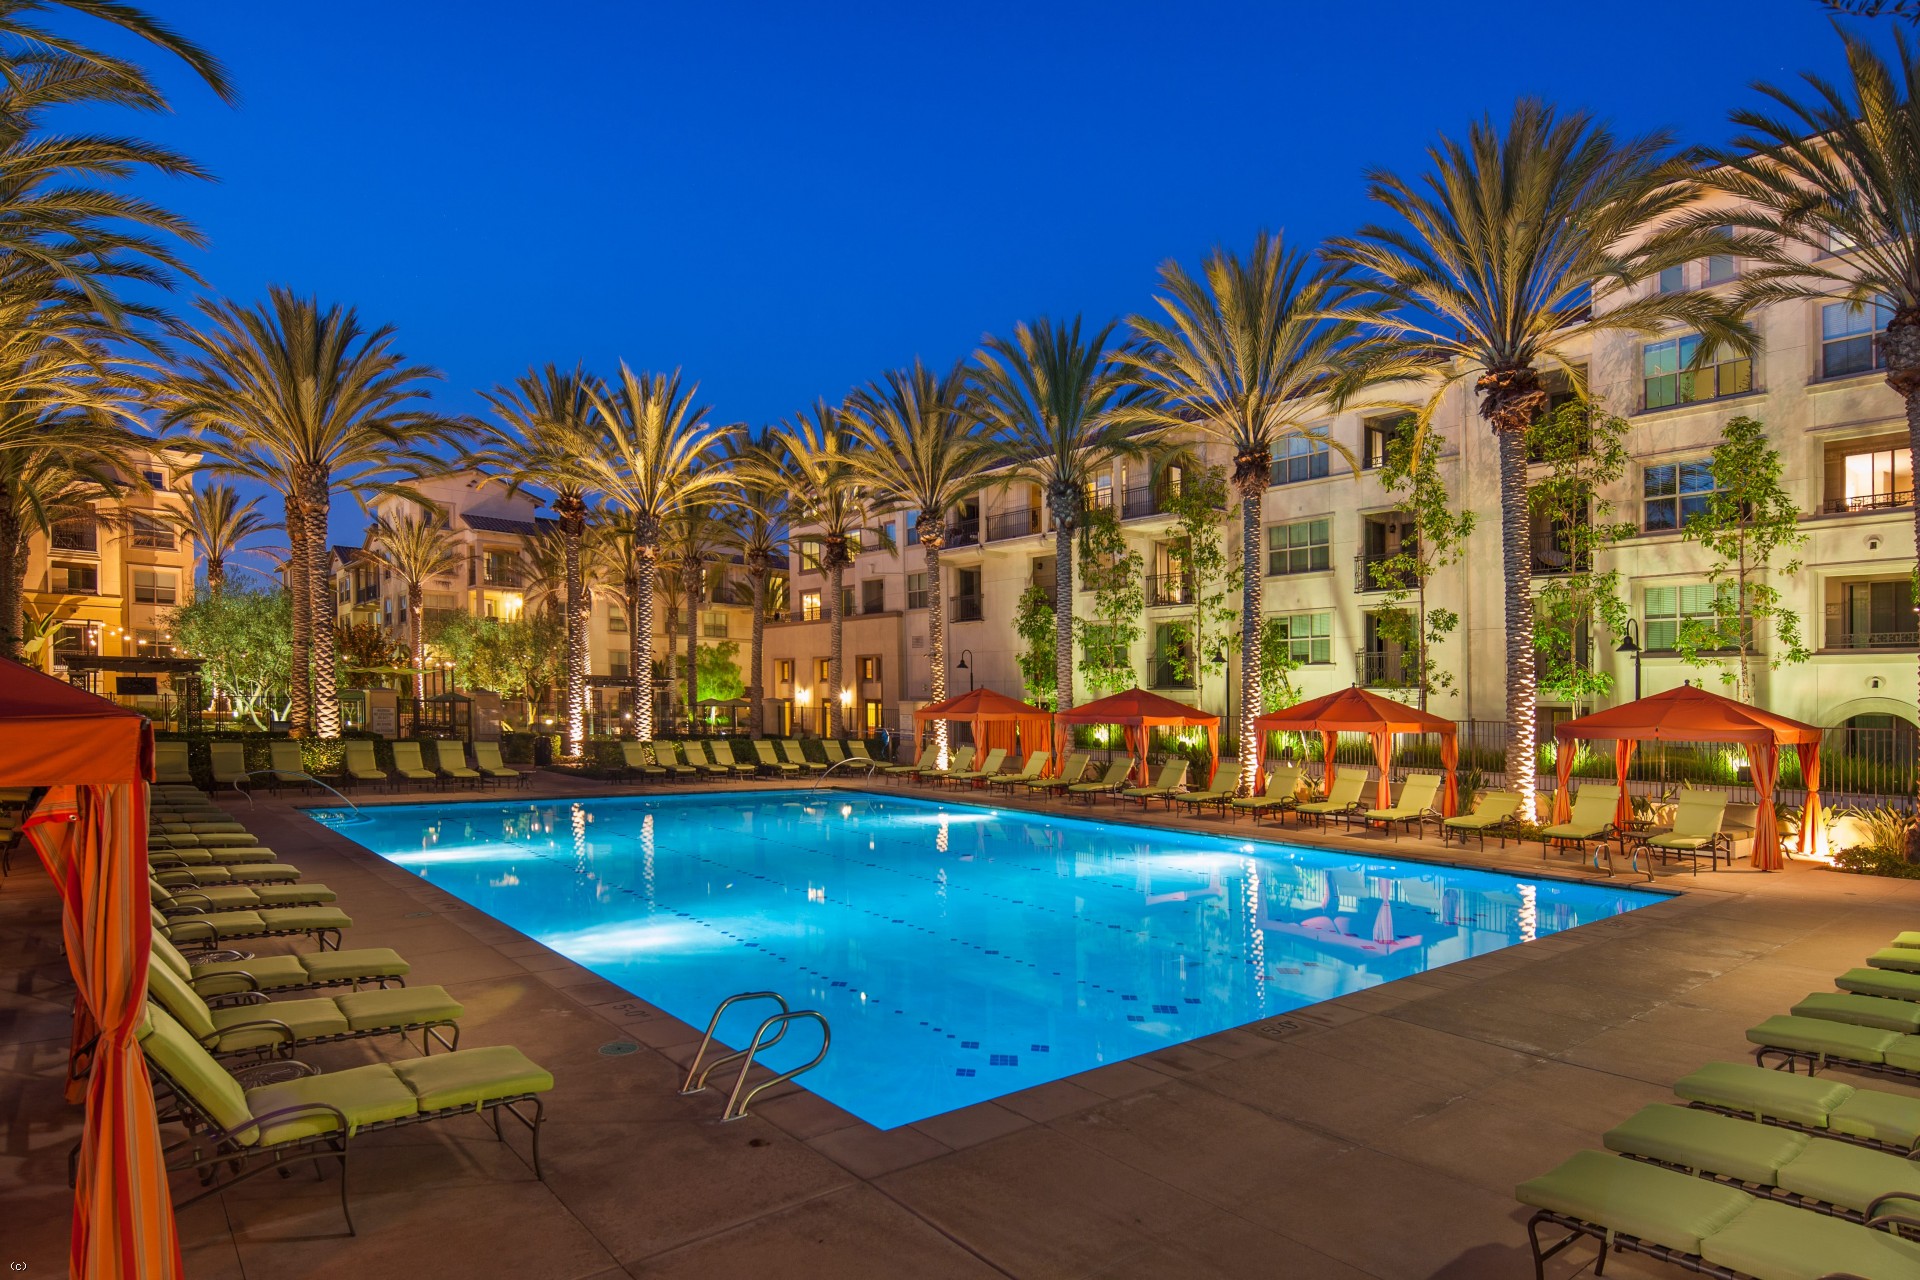 Pacific Ridge Apartments - San Diego, CA - Cure all of your